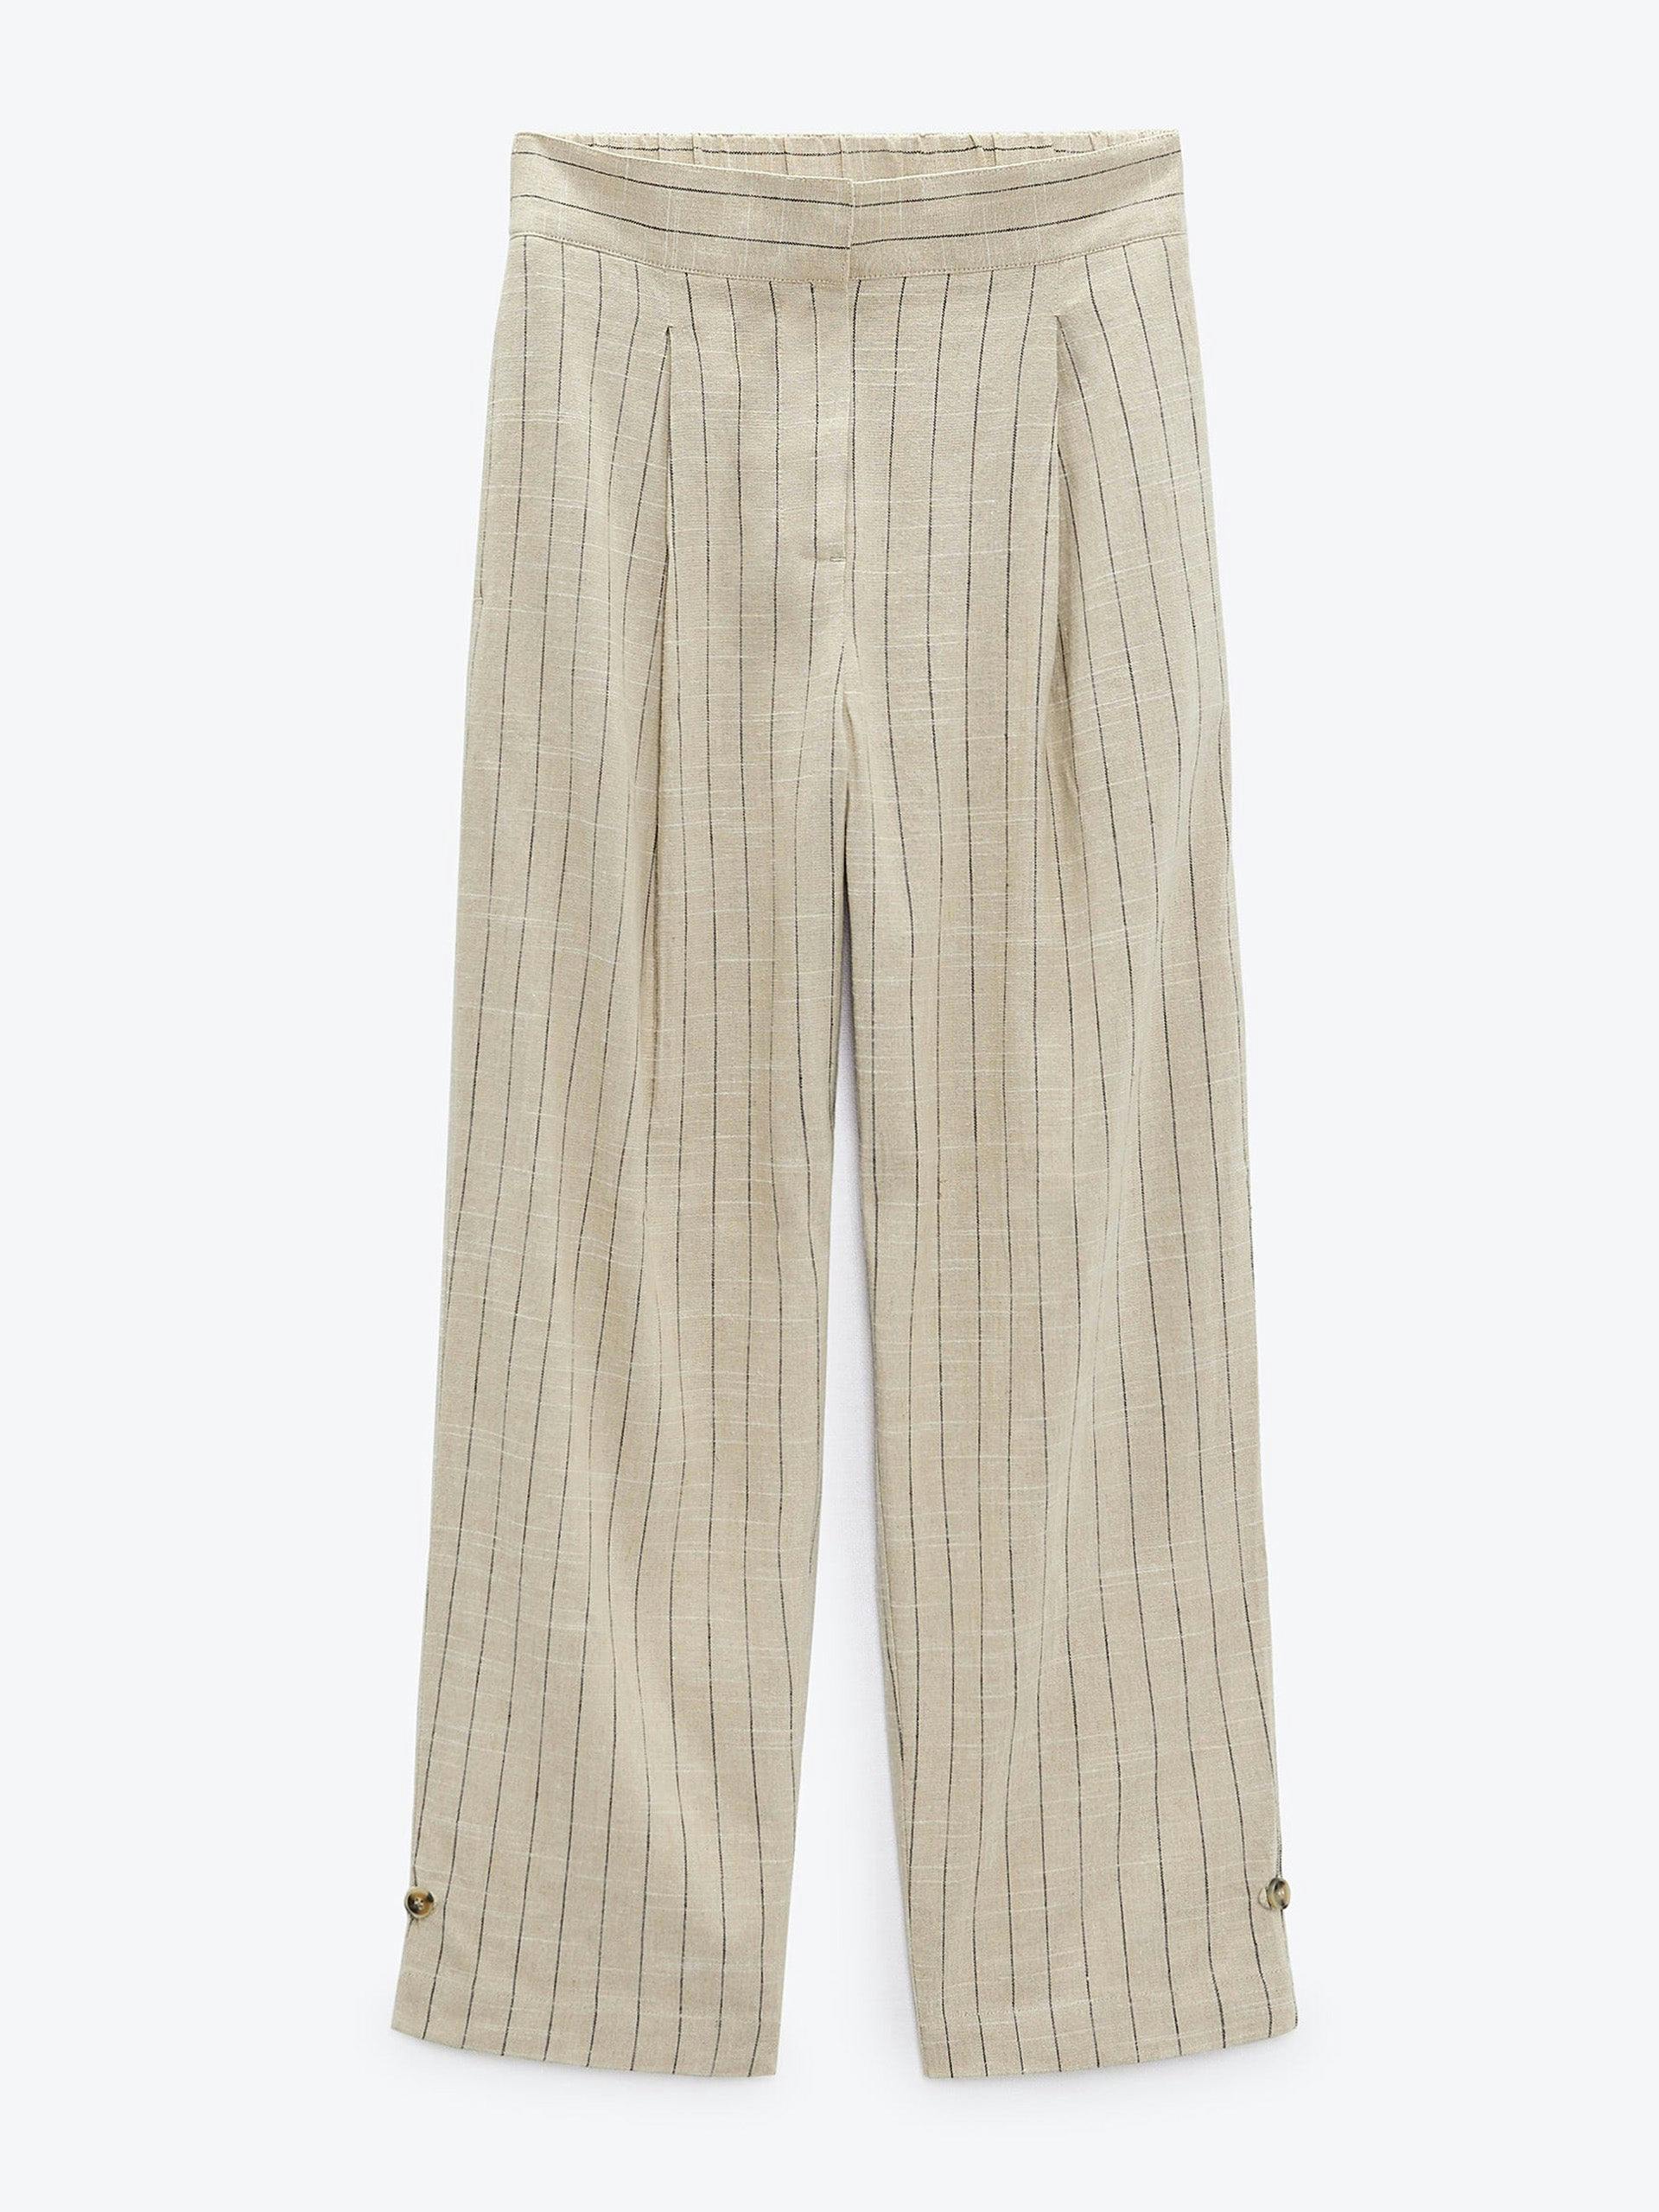 Sand striped linen blend trousers